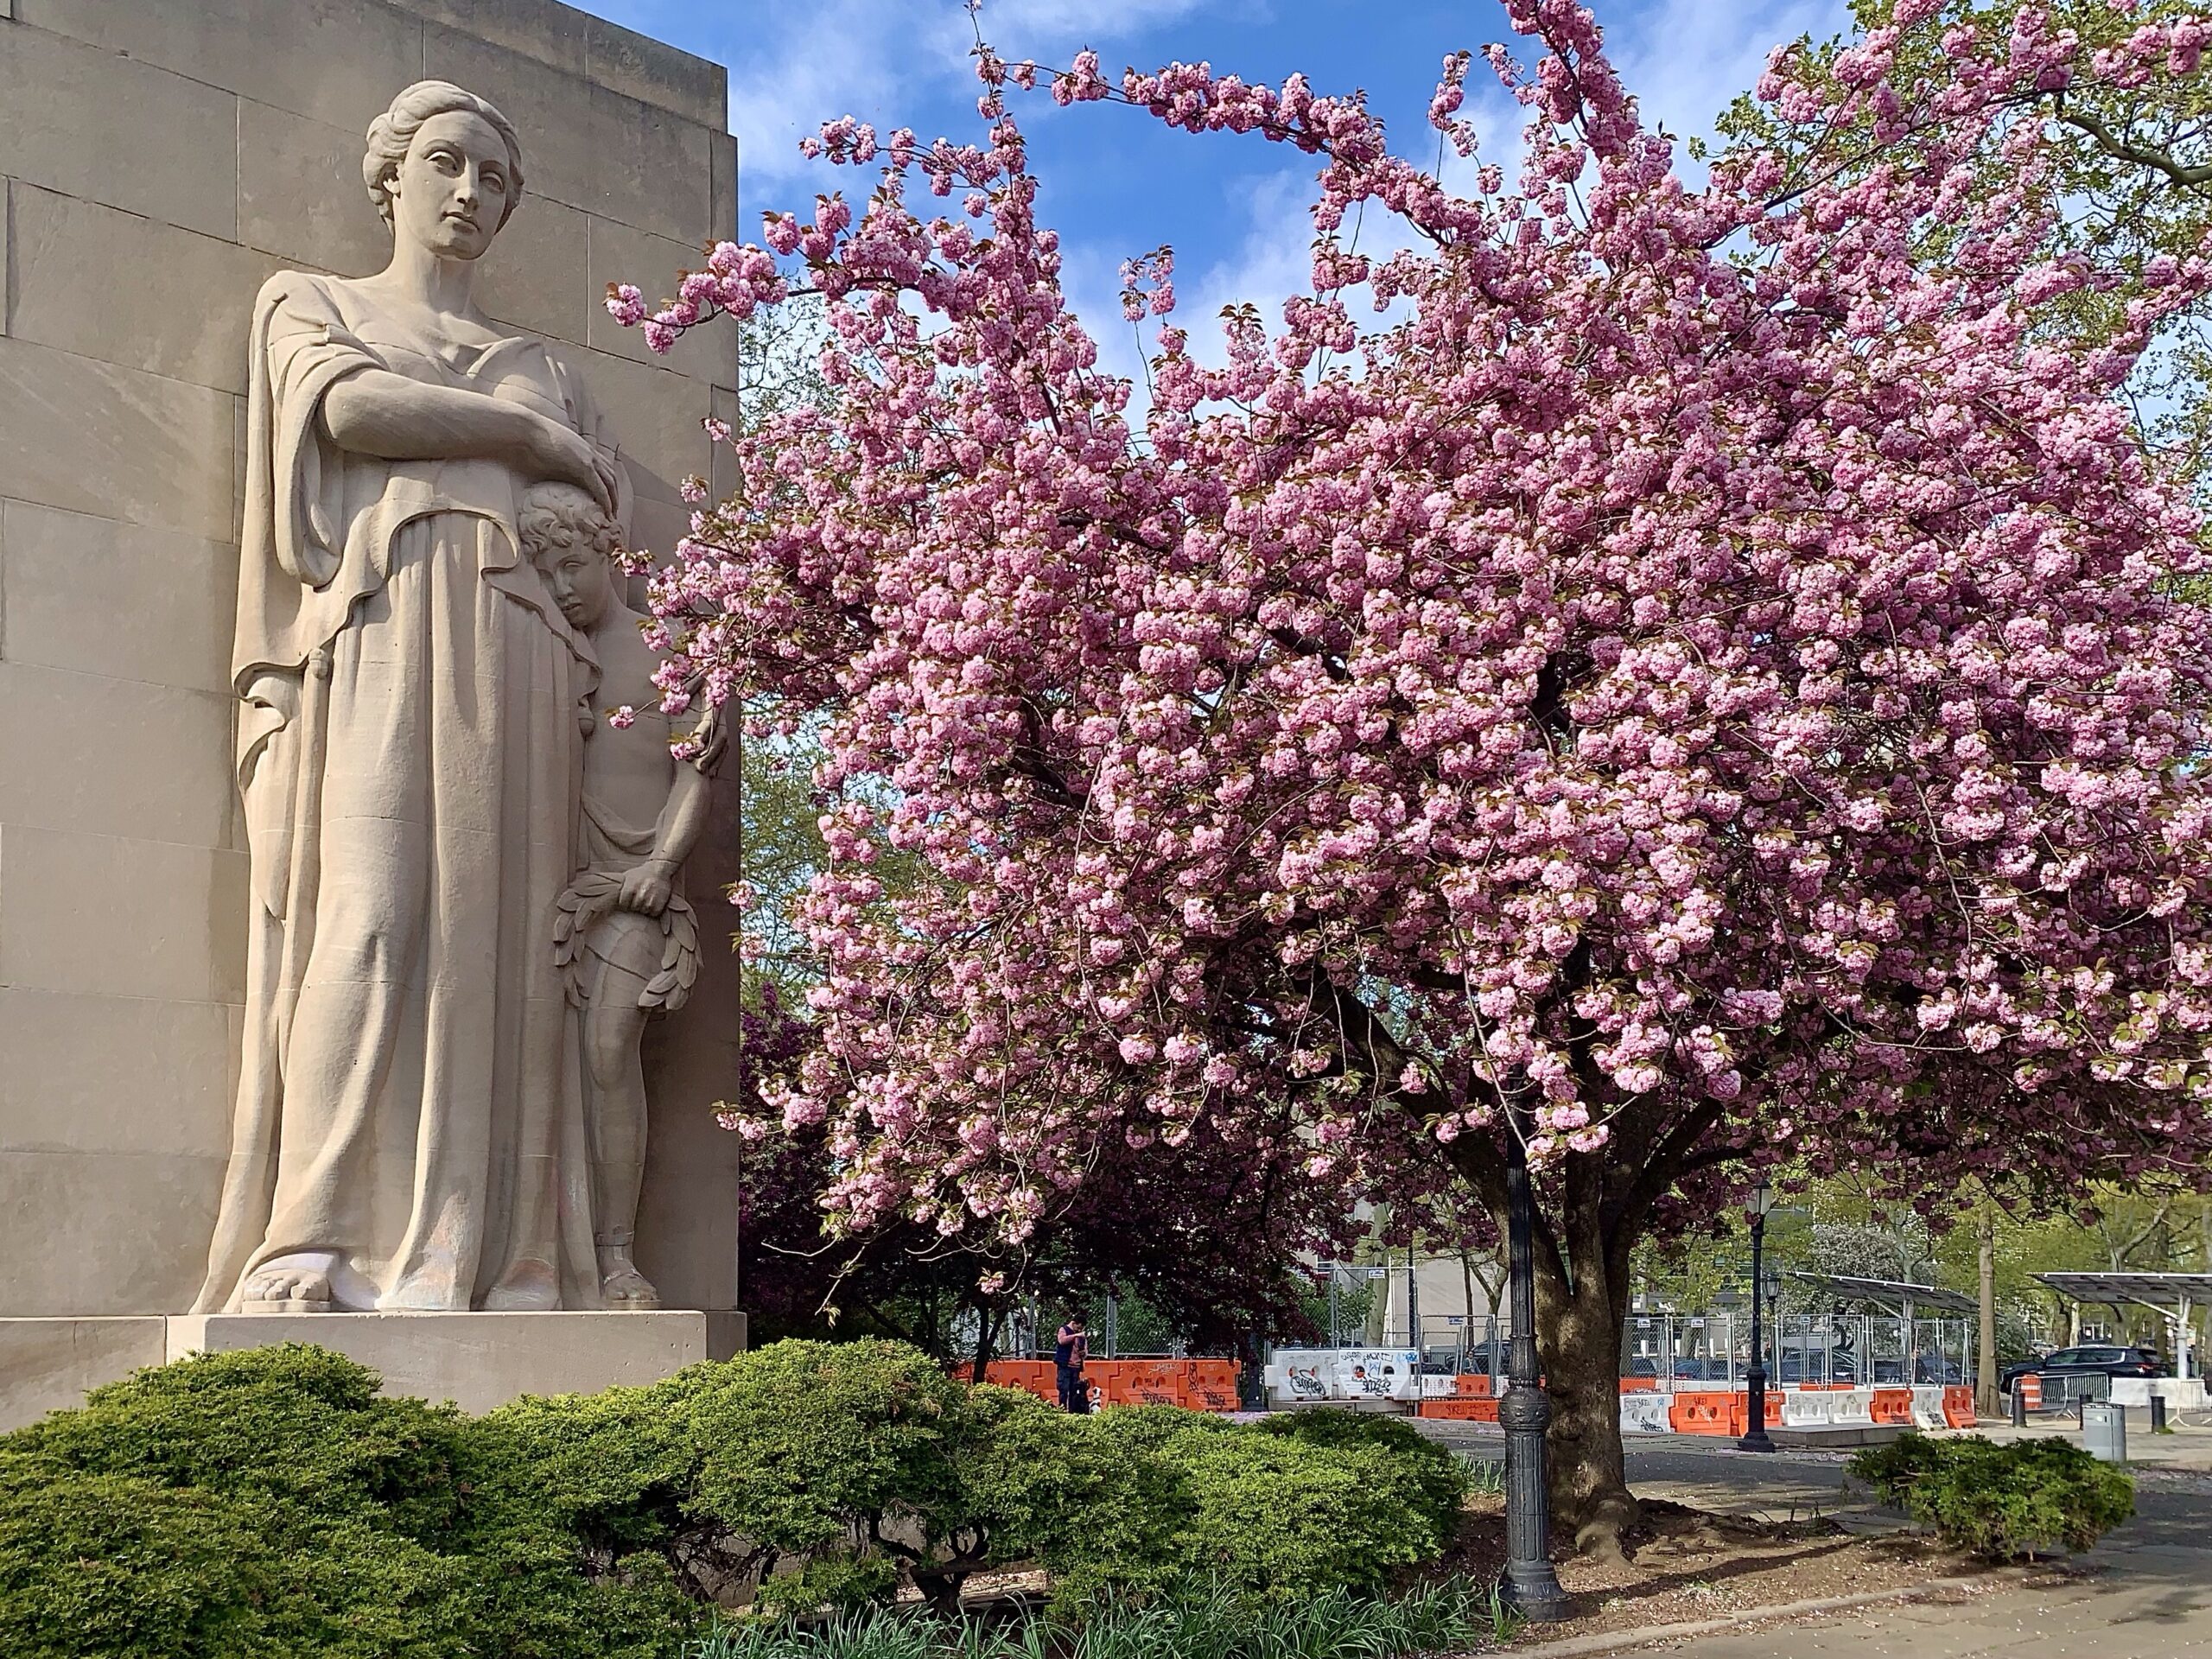 This monumental sculpture by Charles Keck at the Brooklyn War Memorial in Cadman Plaza Park has seen 73 springs come and go since she was dedicated in 1951. Blooming next to her is a magnificent Japanese Flowering Cherry.